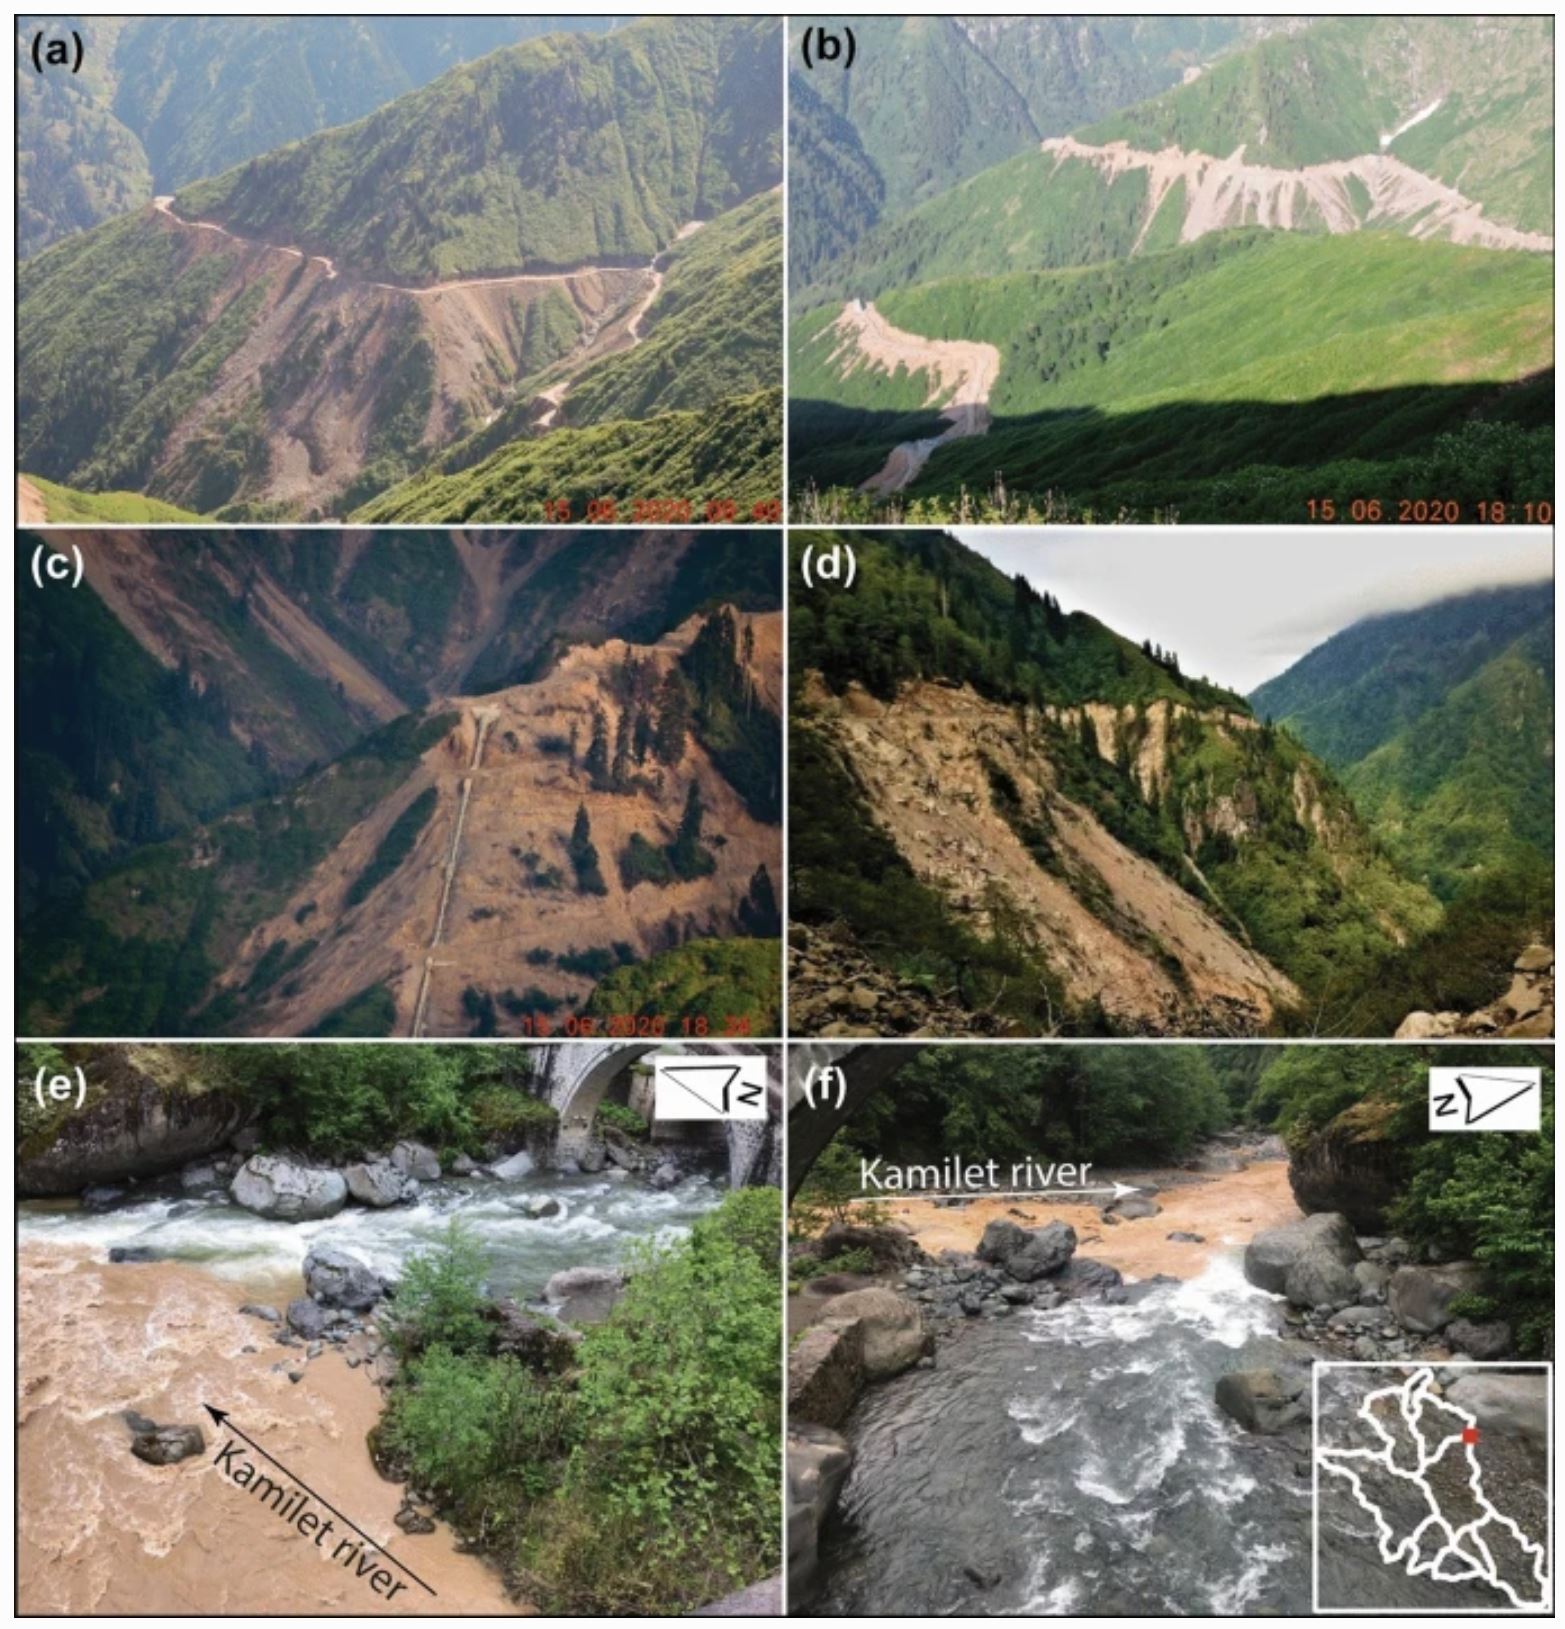 Examples of road related landslides, and their impacts, in the Arhavi area of Turkey.